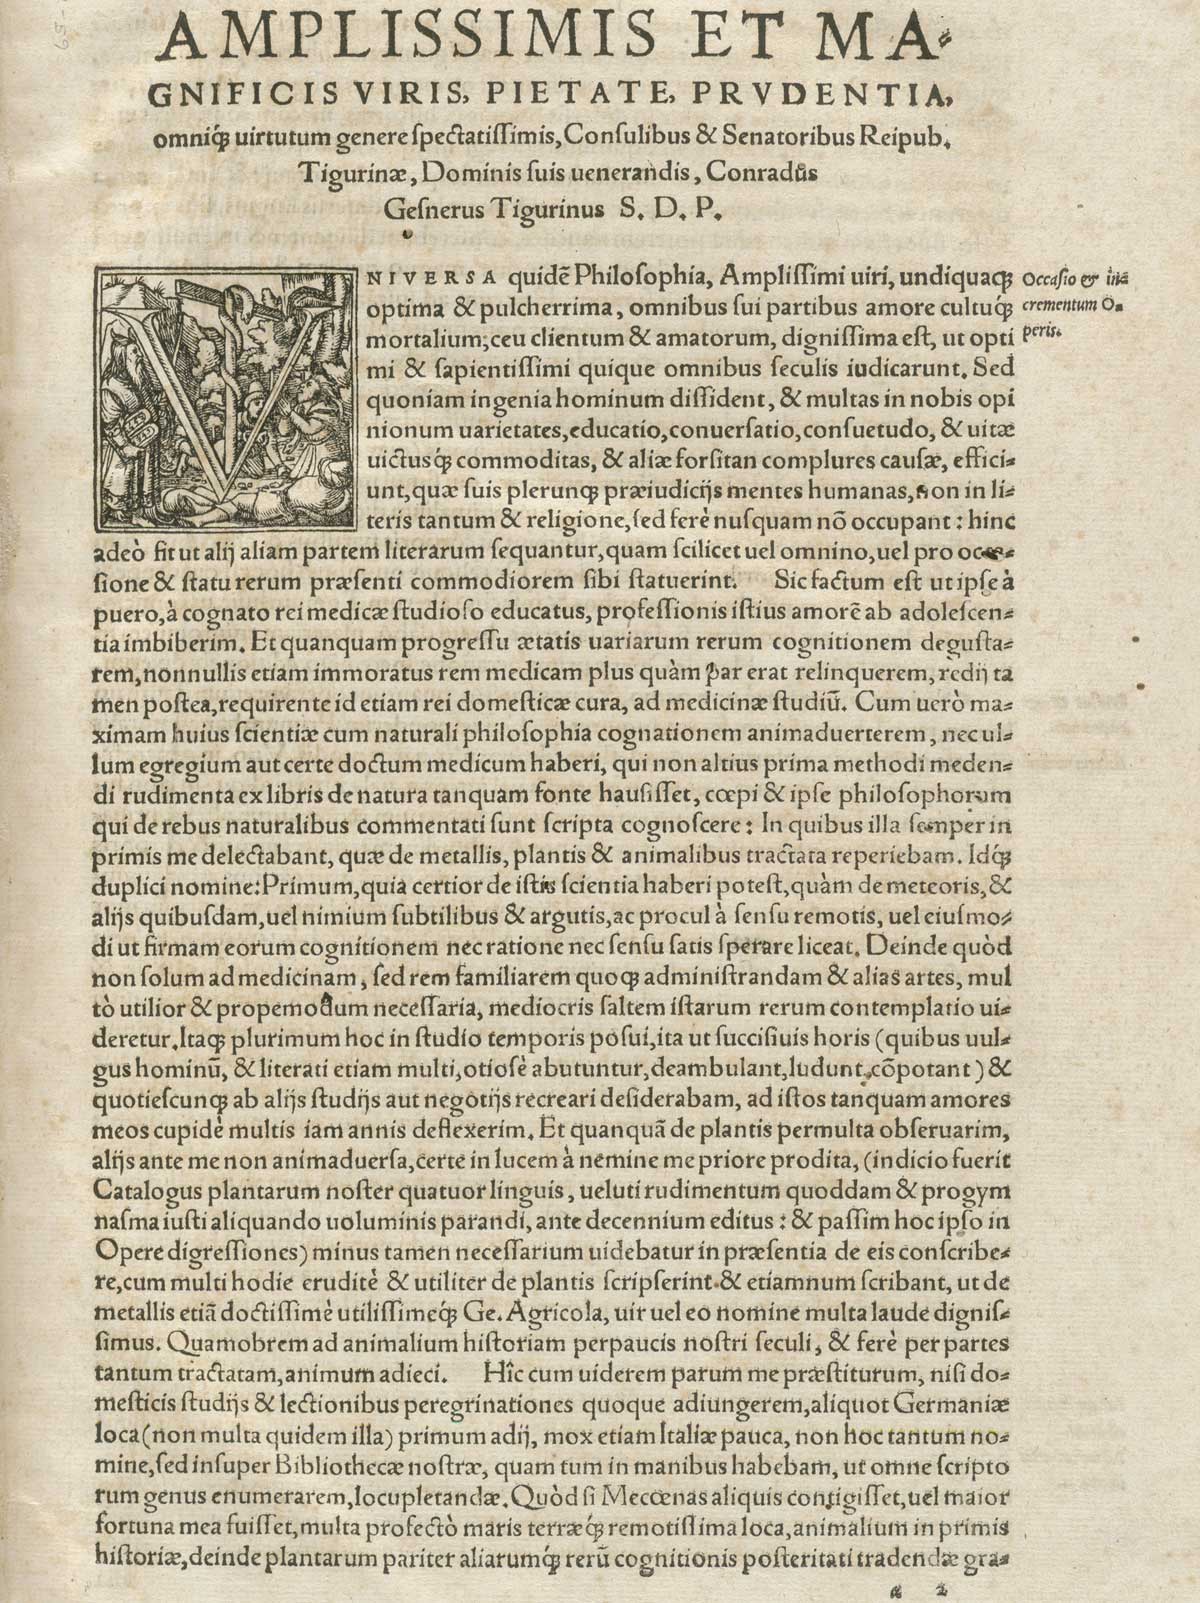 The dedication page from volume 1 of Conrad Gessner's Conradi Gesneri medici Tigurini Historiae animalium, featuring a historiated initial at the beginning of the text.